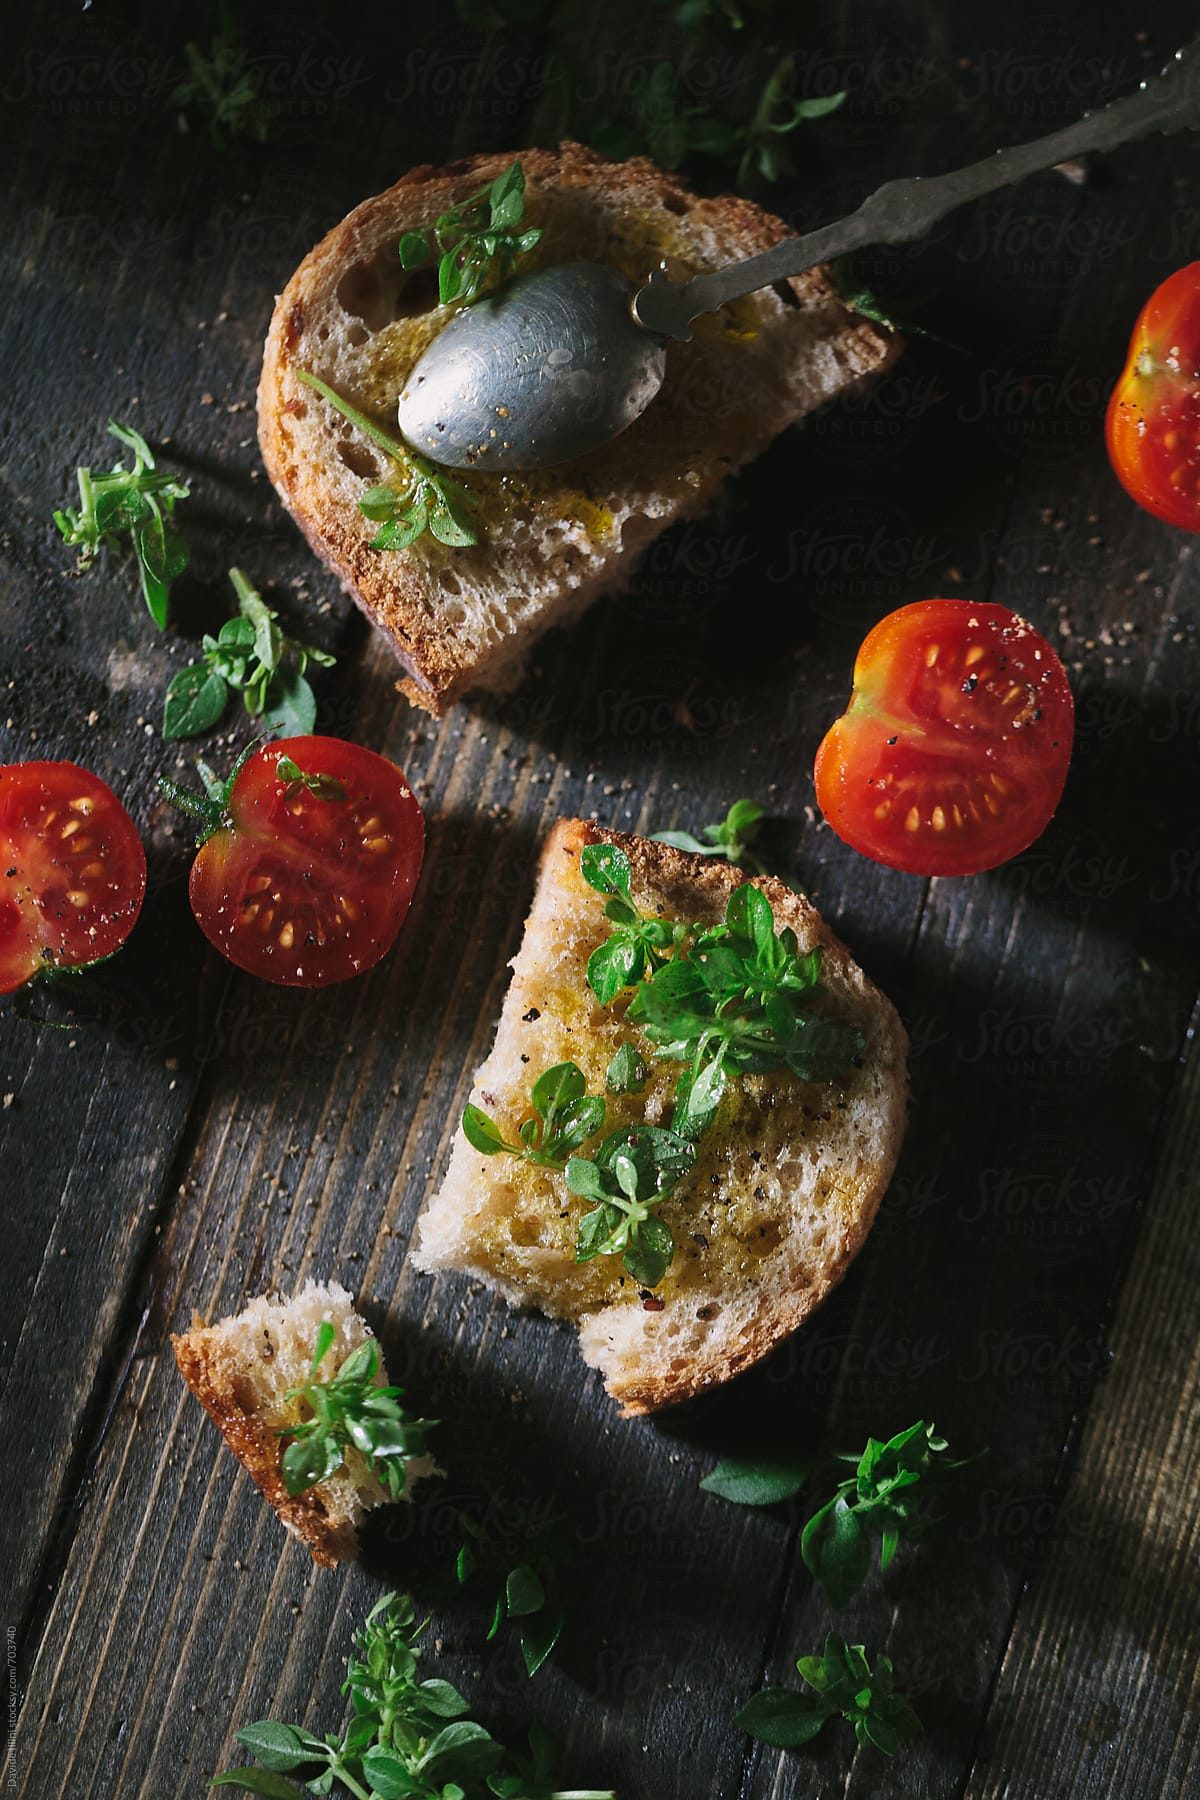 Bread with olive oil and tomatoes